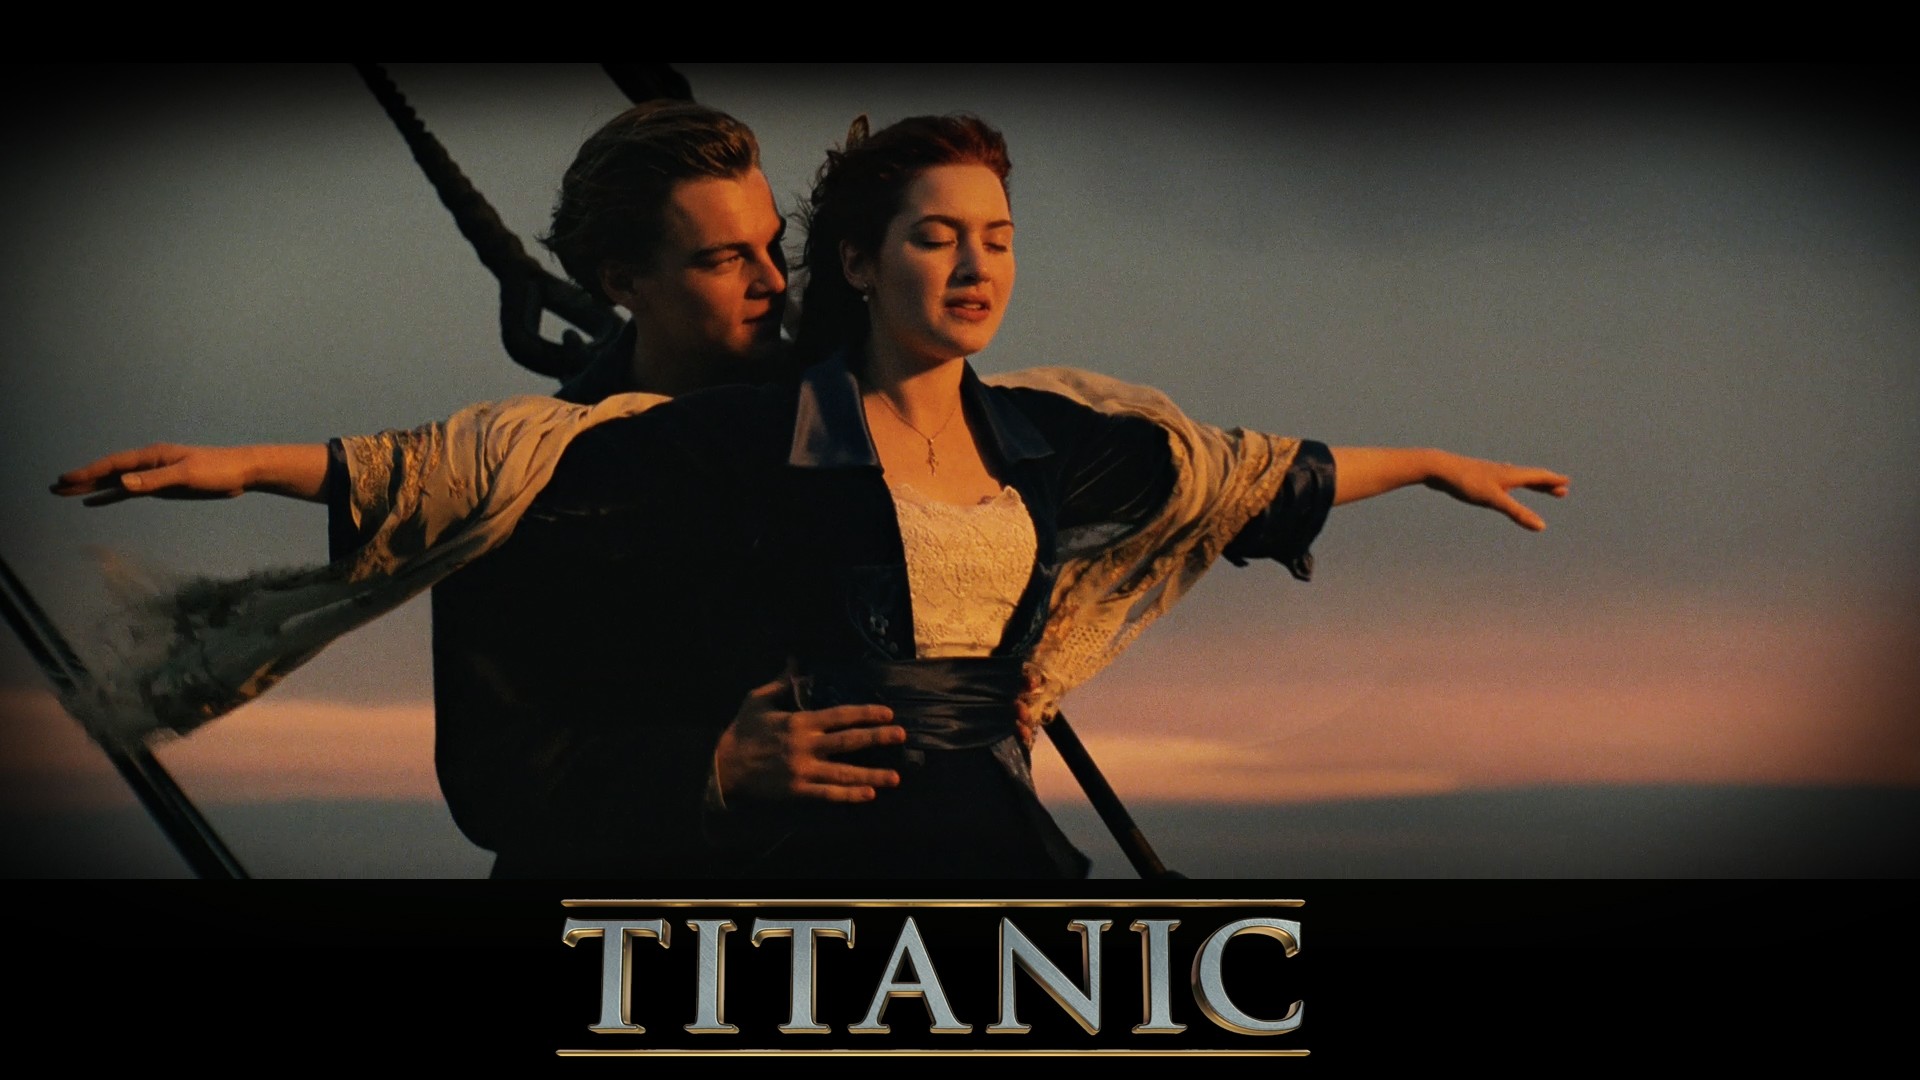 78 Famous Titanic Quotes [from eyewitnesses and the movie]